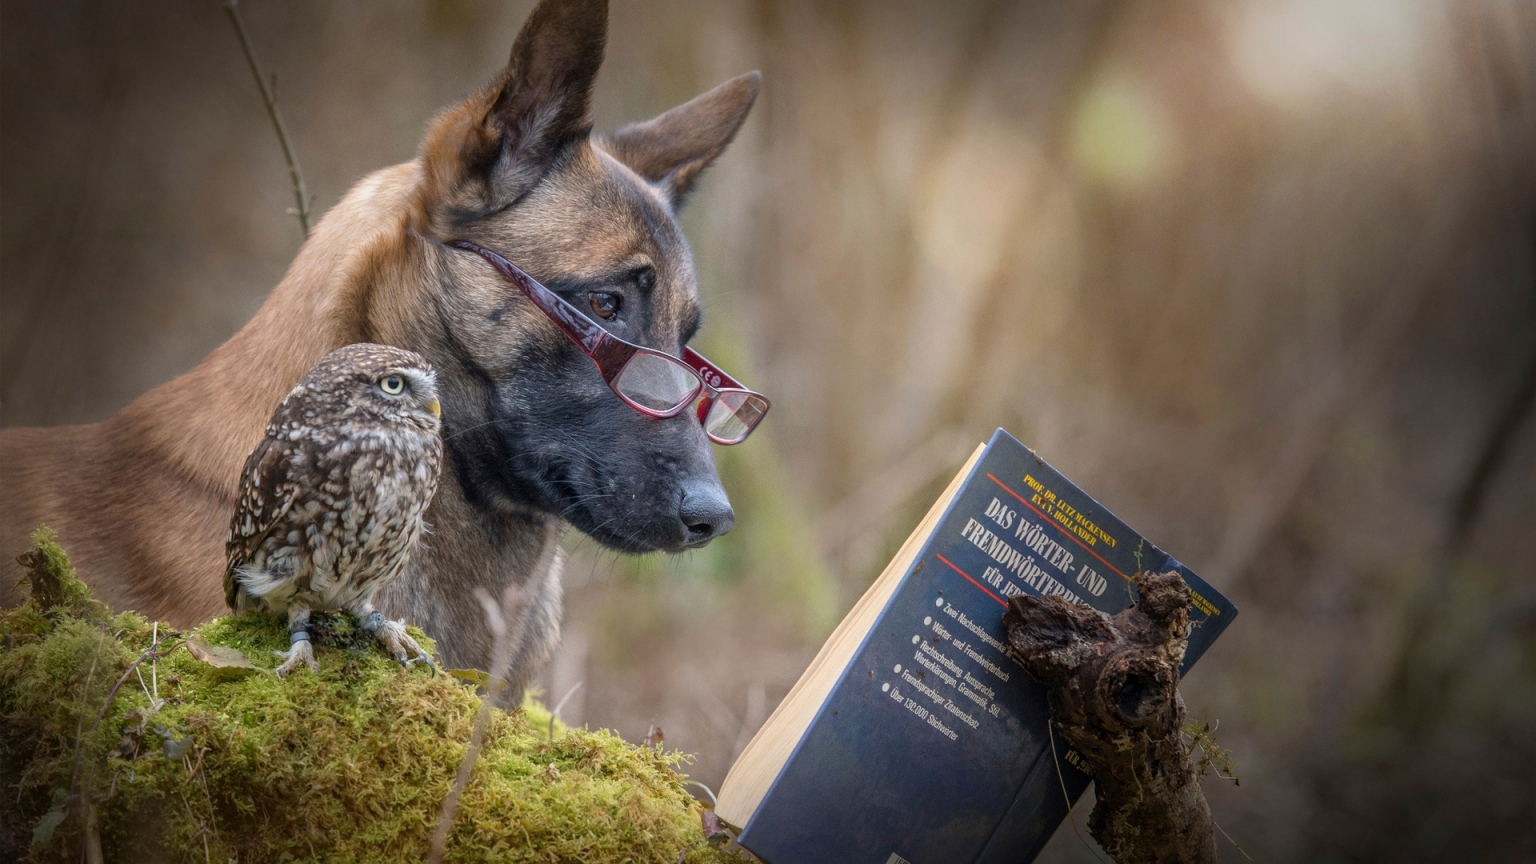 Dog and Owl Reading a Book for 1536 x 864 HDTV resolution